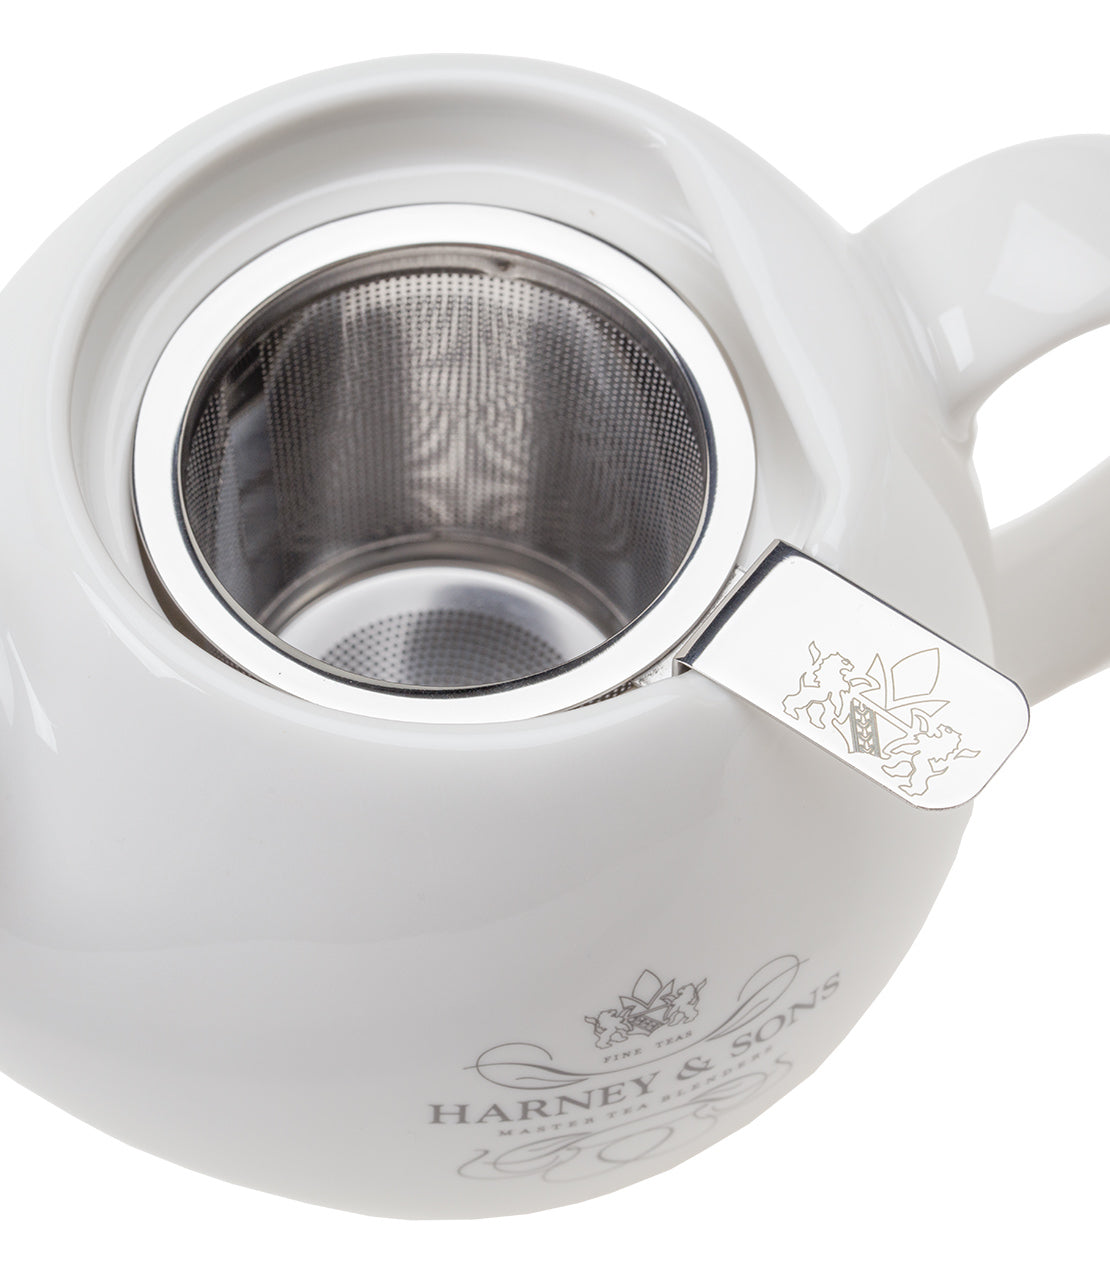 Harney & Sons Teapot with Infuser -   - Harney & Sons Fine Teas